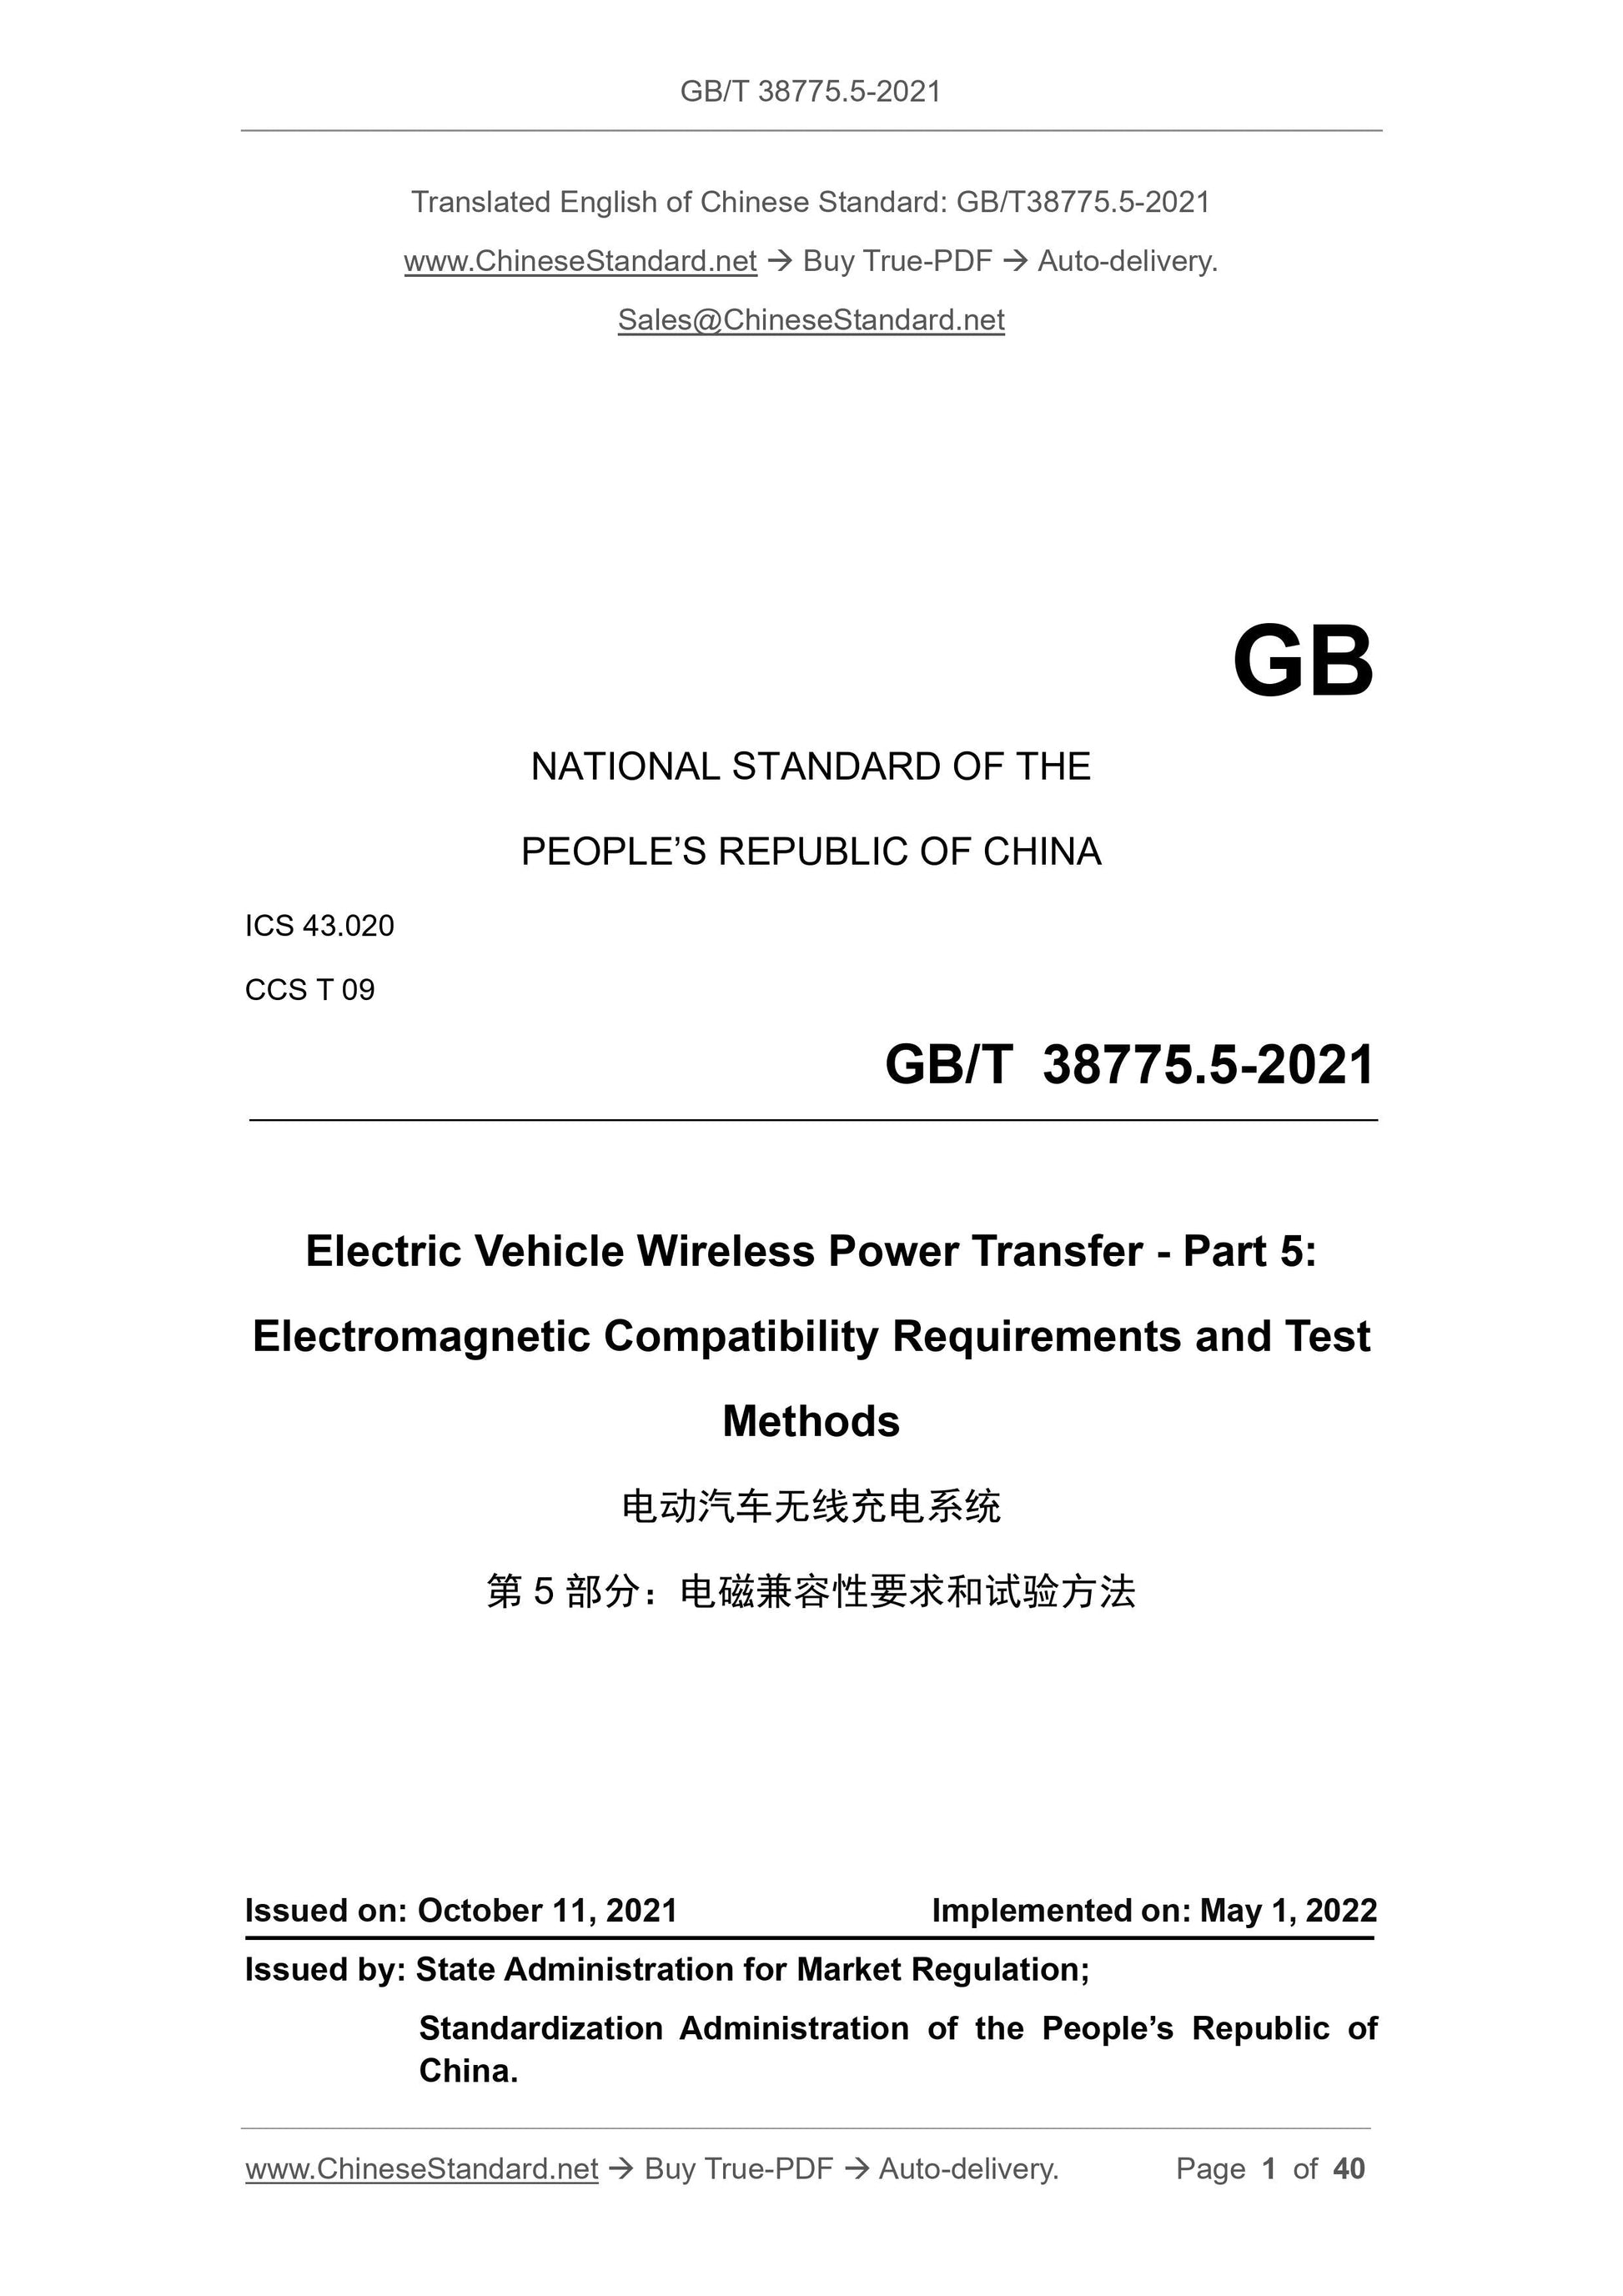 GB/T 38775.5-2021 Page 1